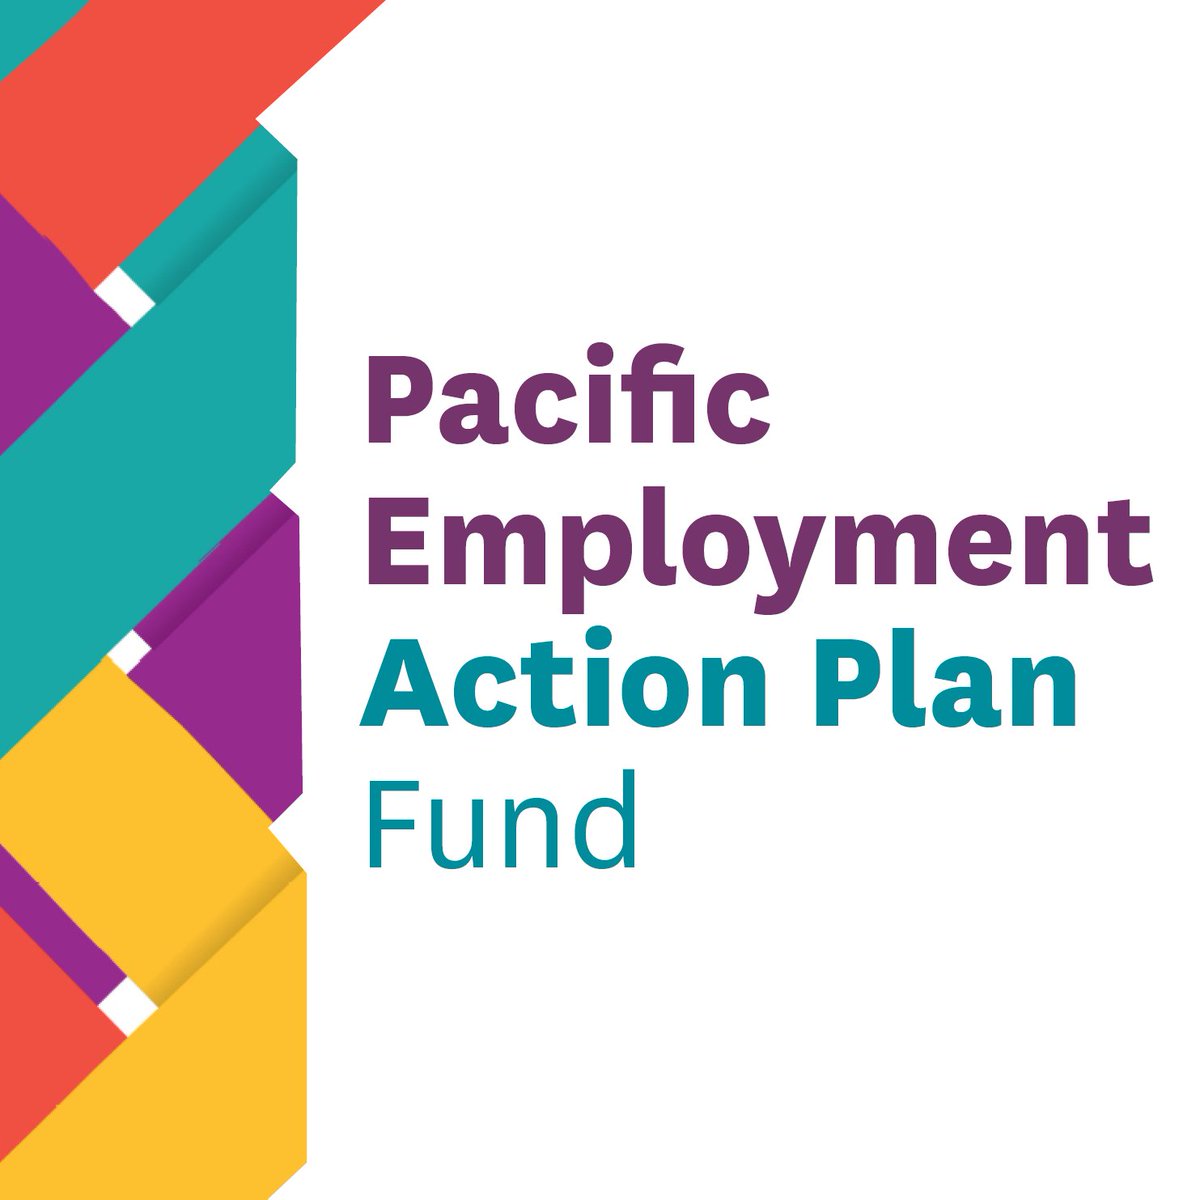 In August, the Ministry of Social Development, in partnership with the Ministry for Pacific Peoples, announced the fund, which has been created for programmes to help build prosperous Pacific communities. 🤩 Visit bit.ly/3EYIUwc for more info!